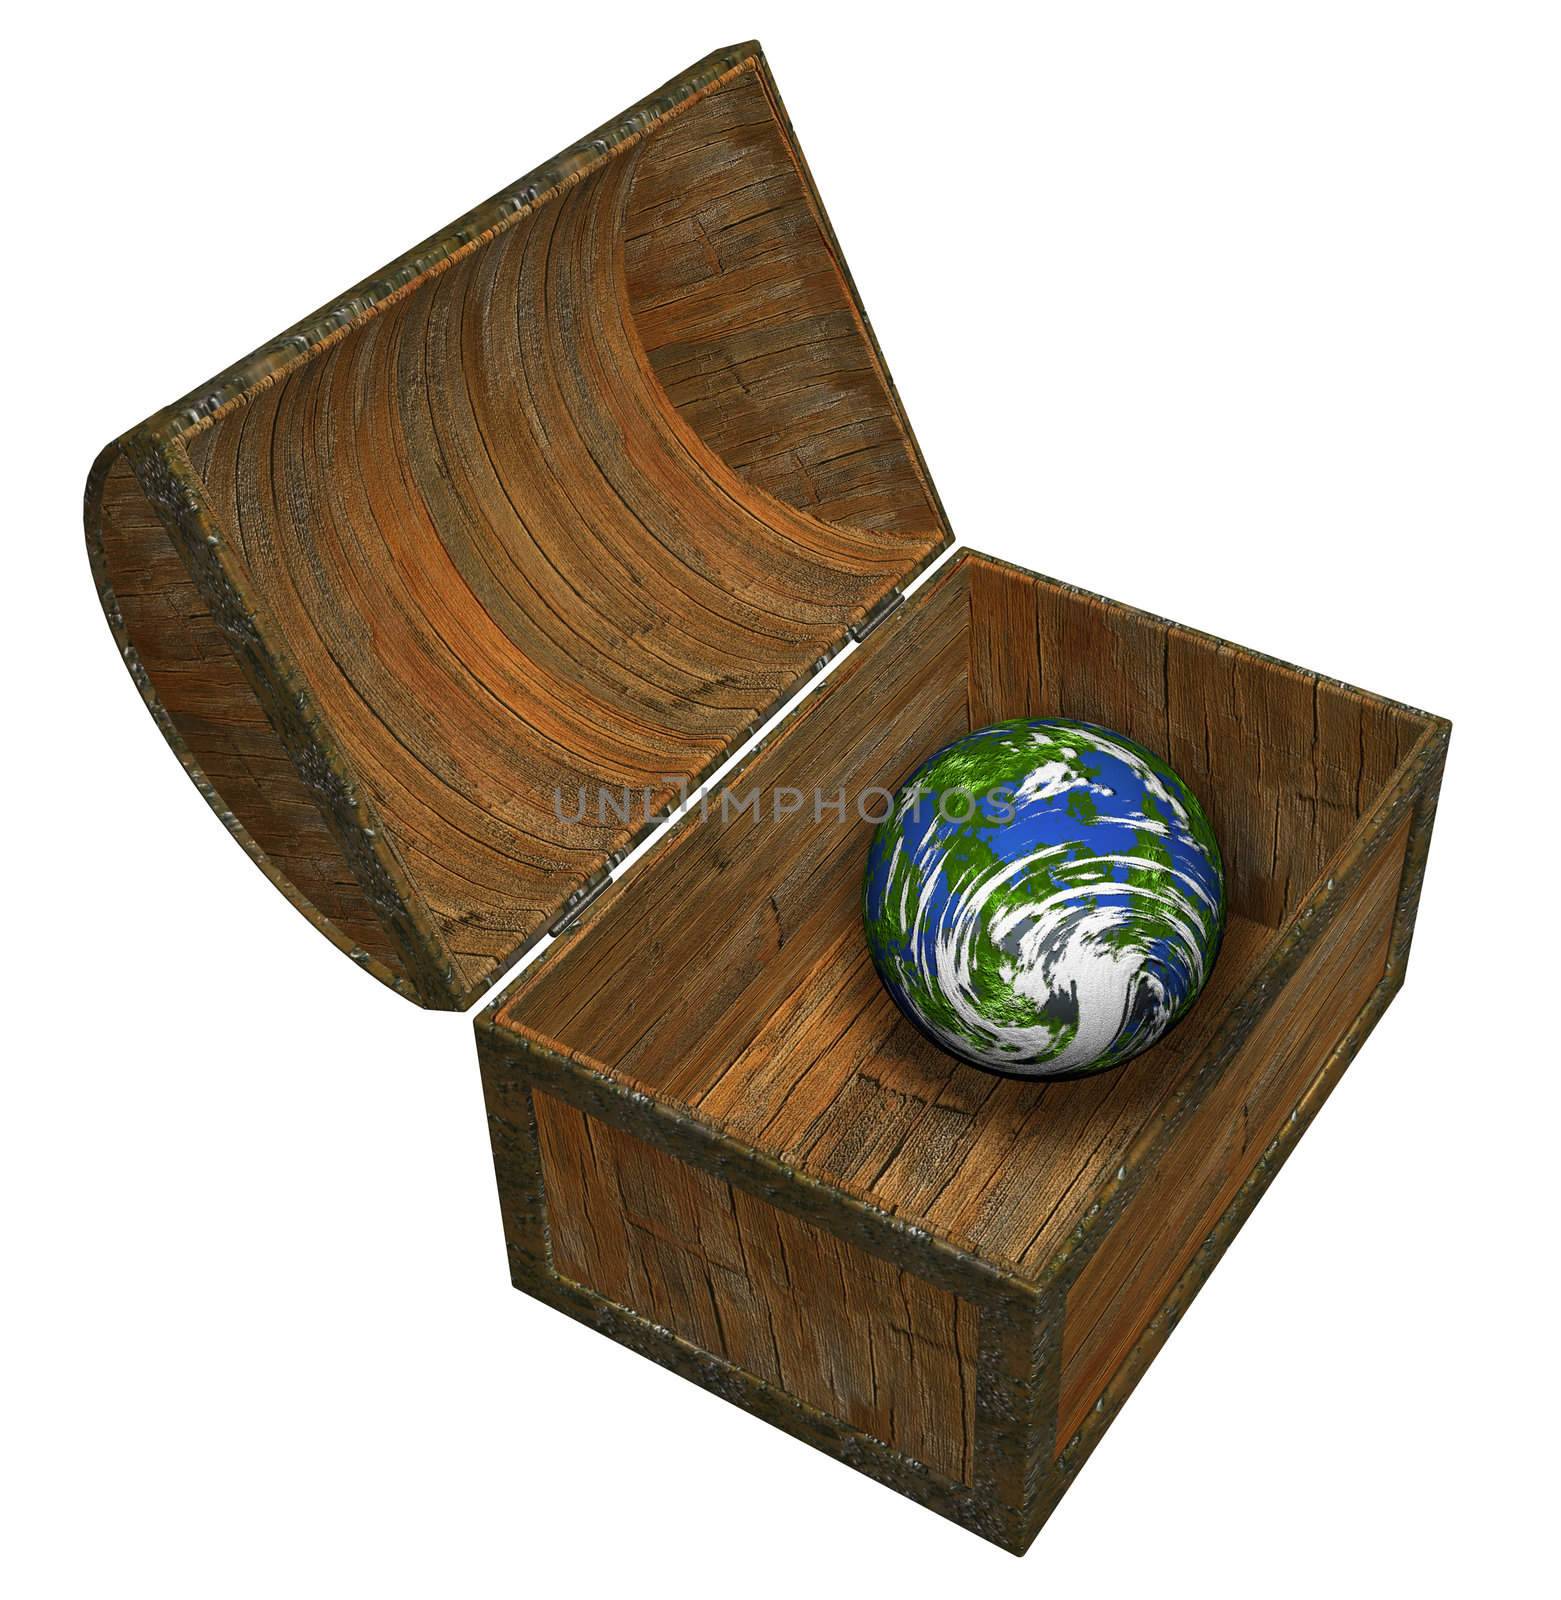 3D render of the Earth in a treasure chest